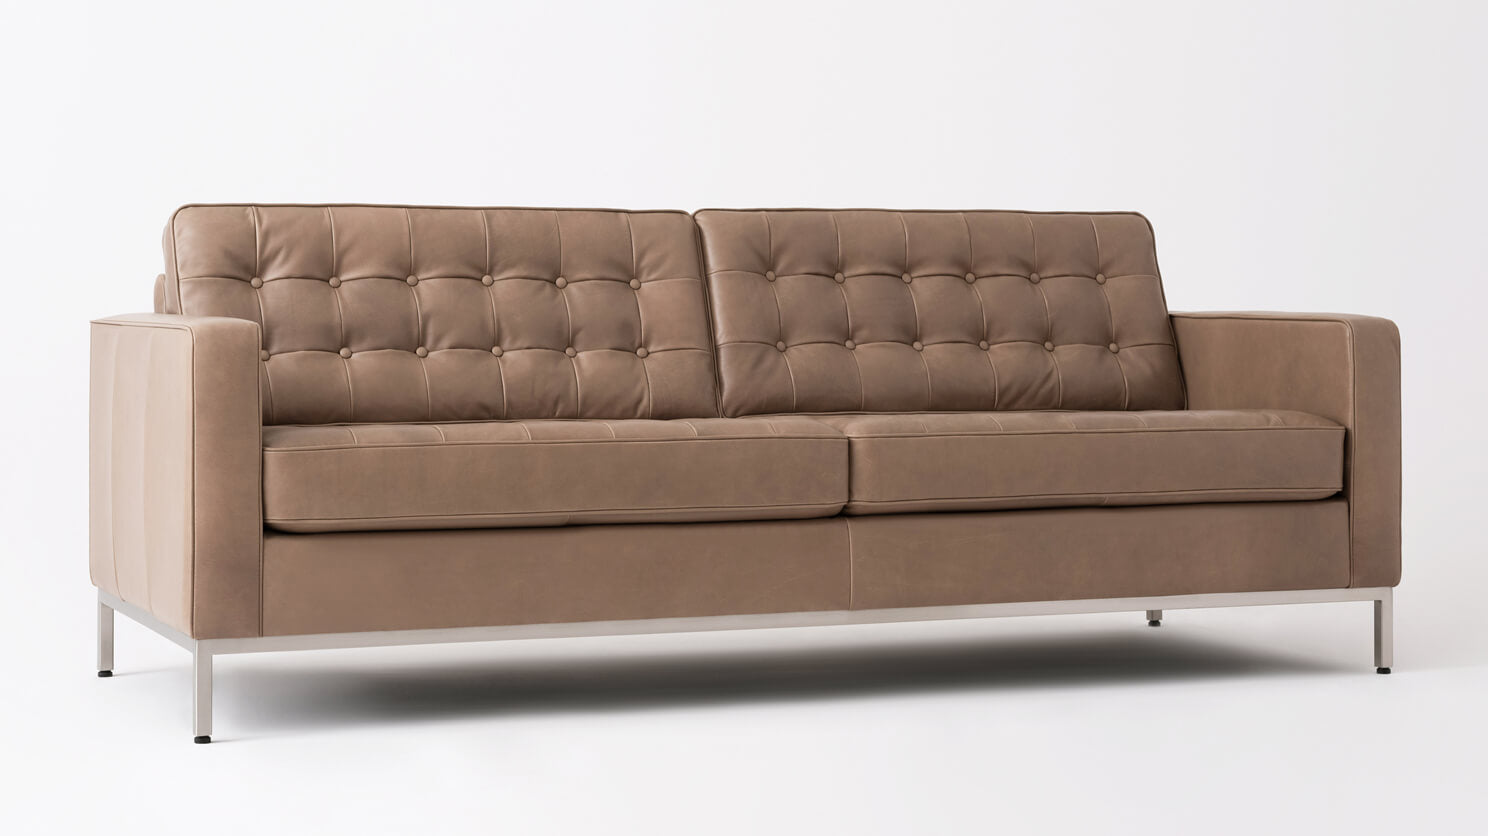 eq3 reverie leather sofa review